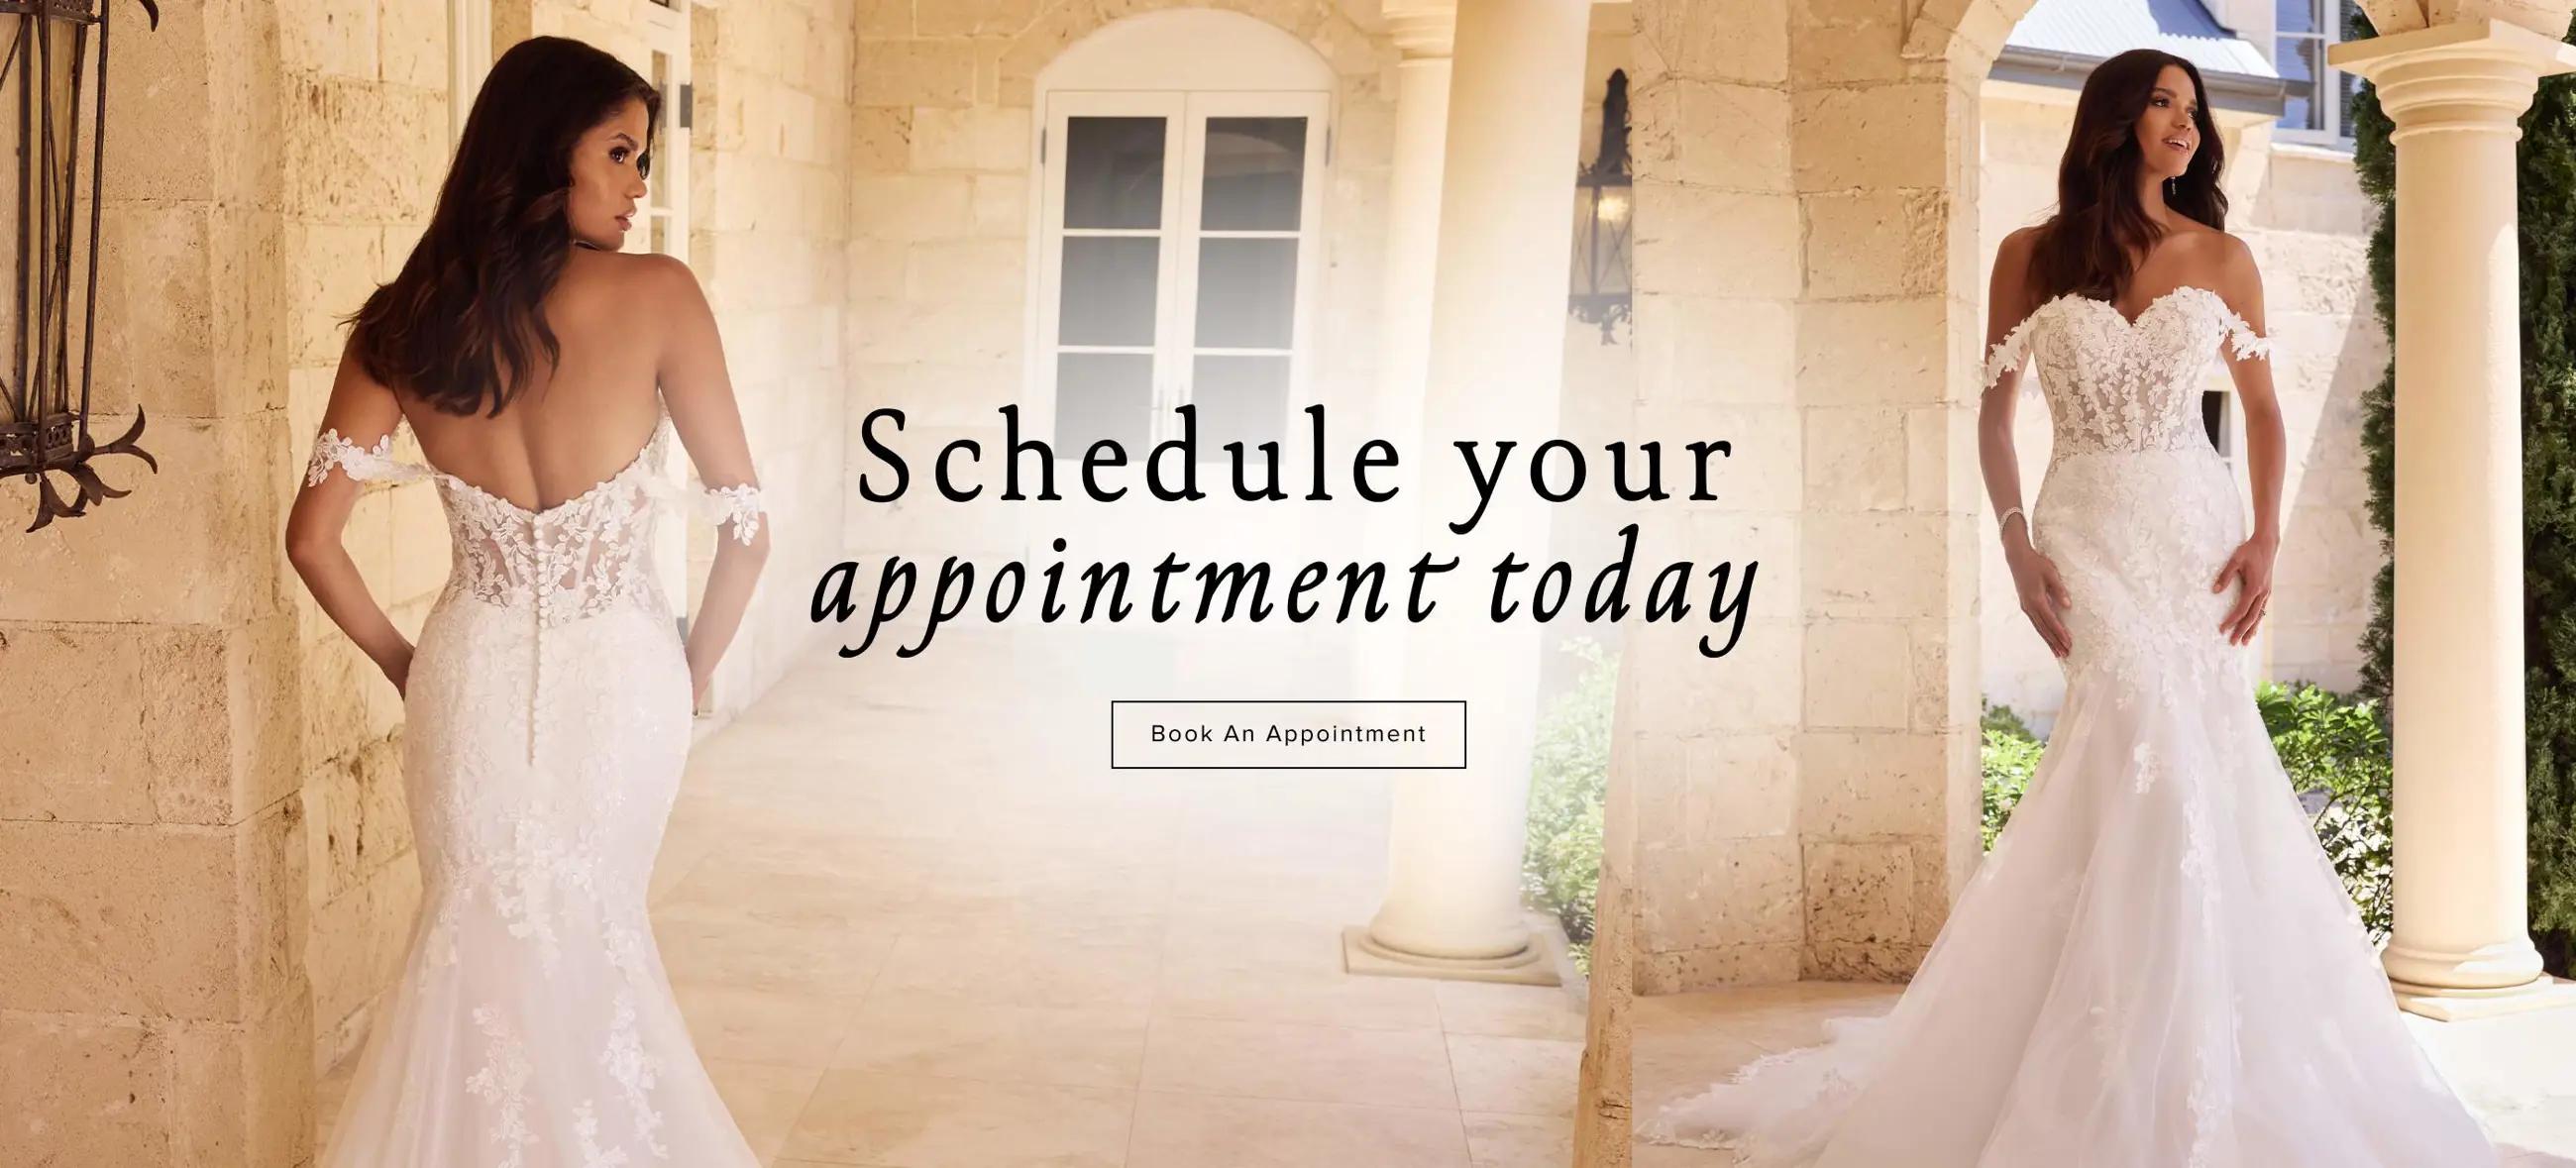 schedule your appointment today - desktop banner.